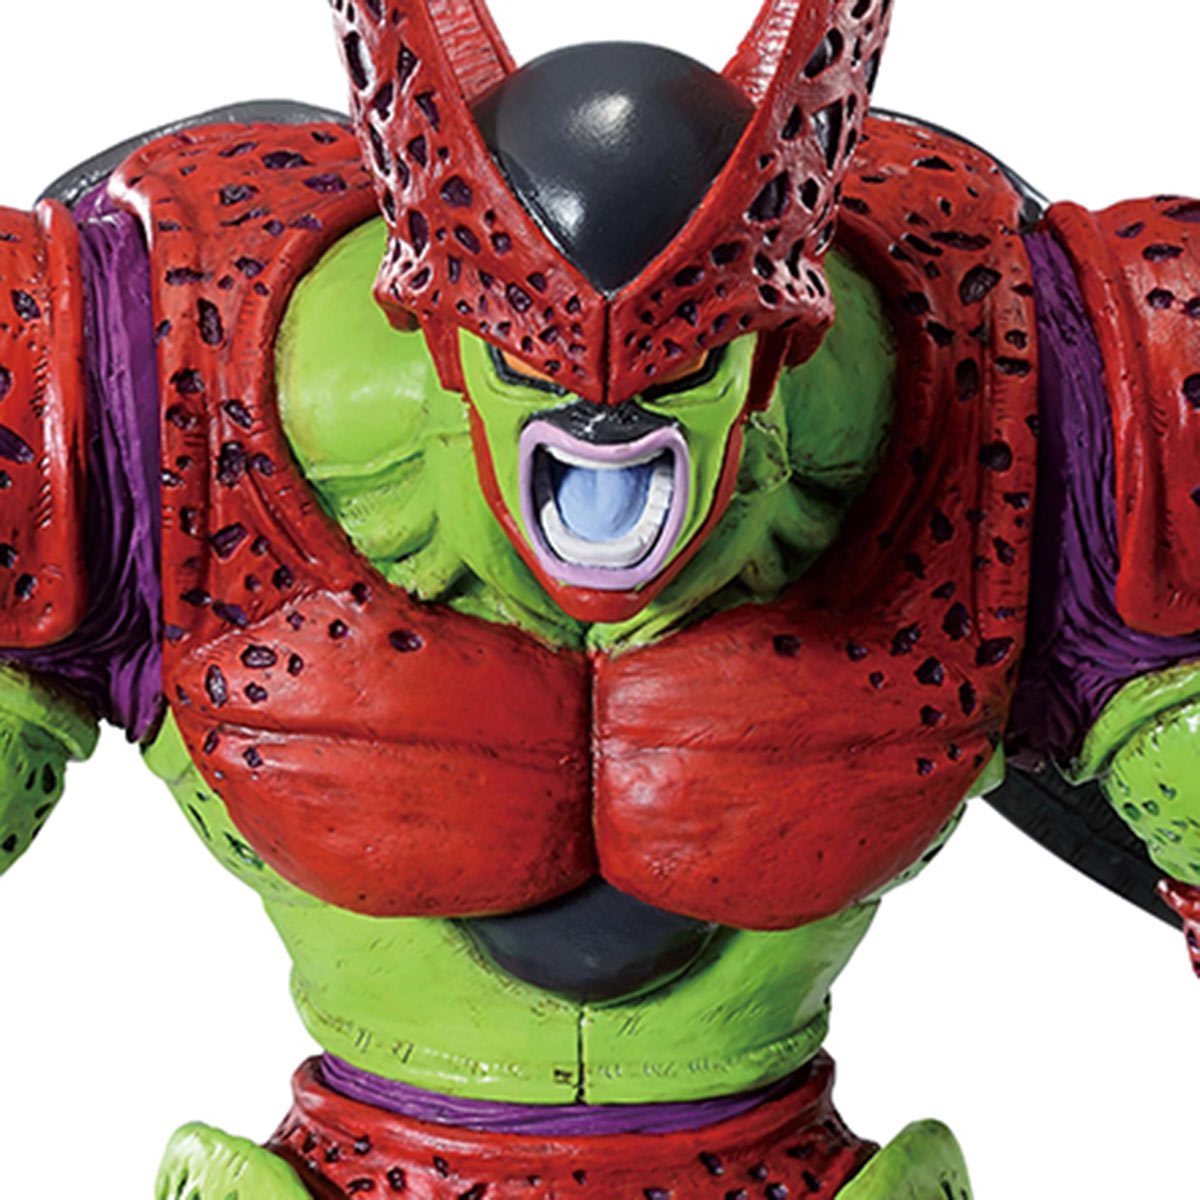 Lego Will on X: This one is a manga villain. Perfect Form Cell